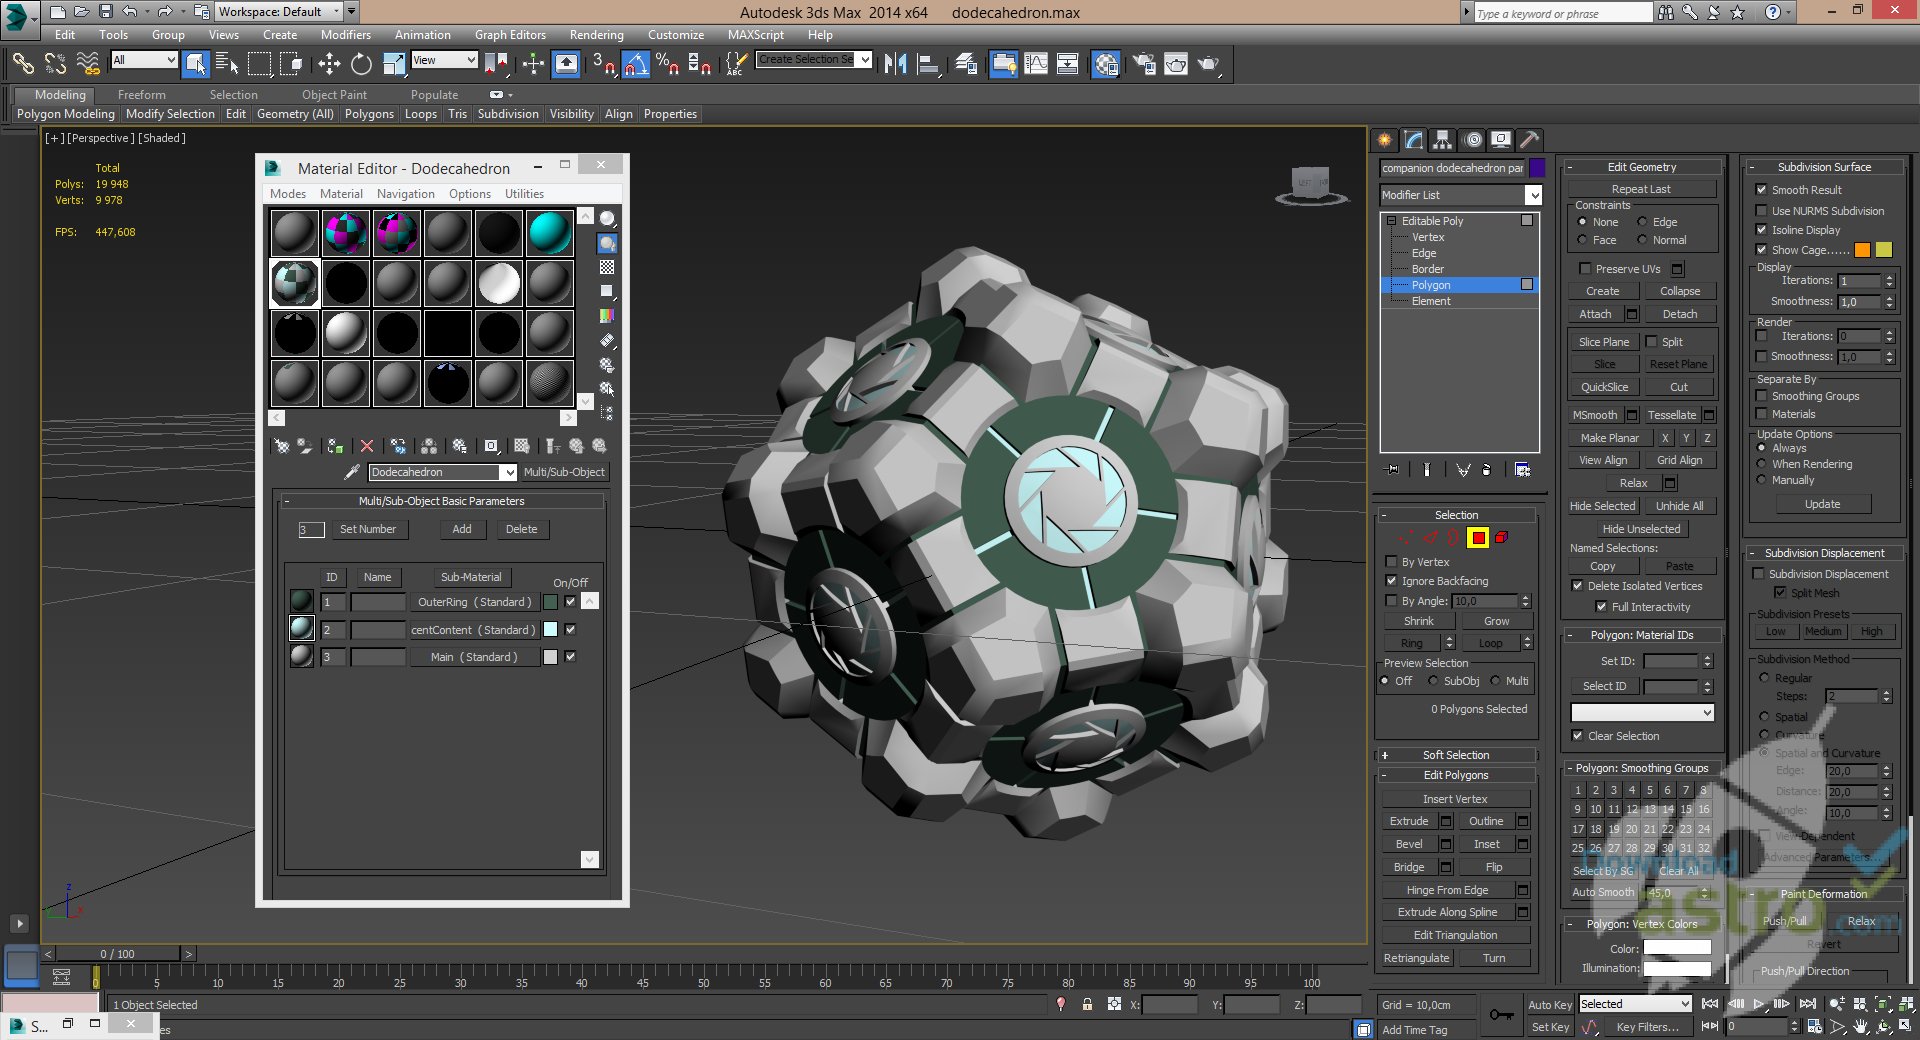 3ds max | 3d modeling, animation & rendering software | autodesk.